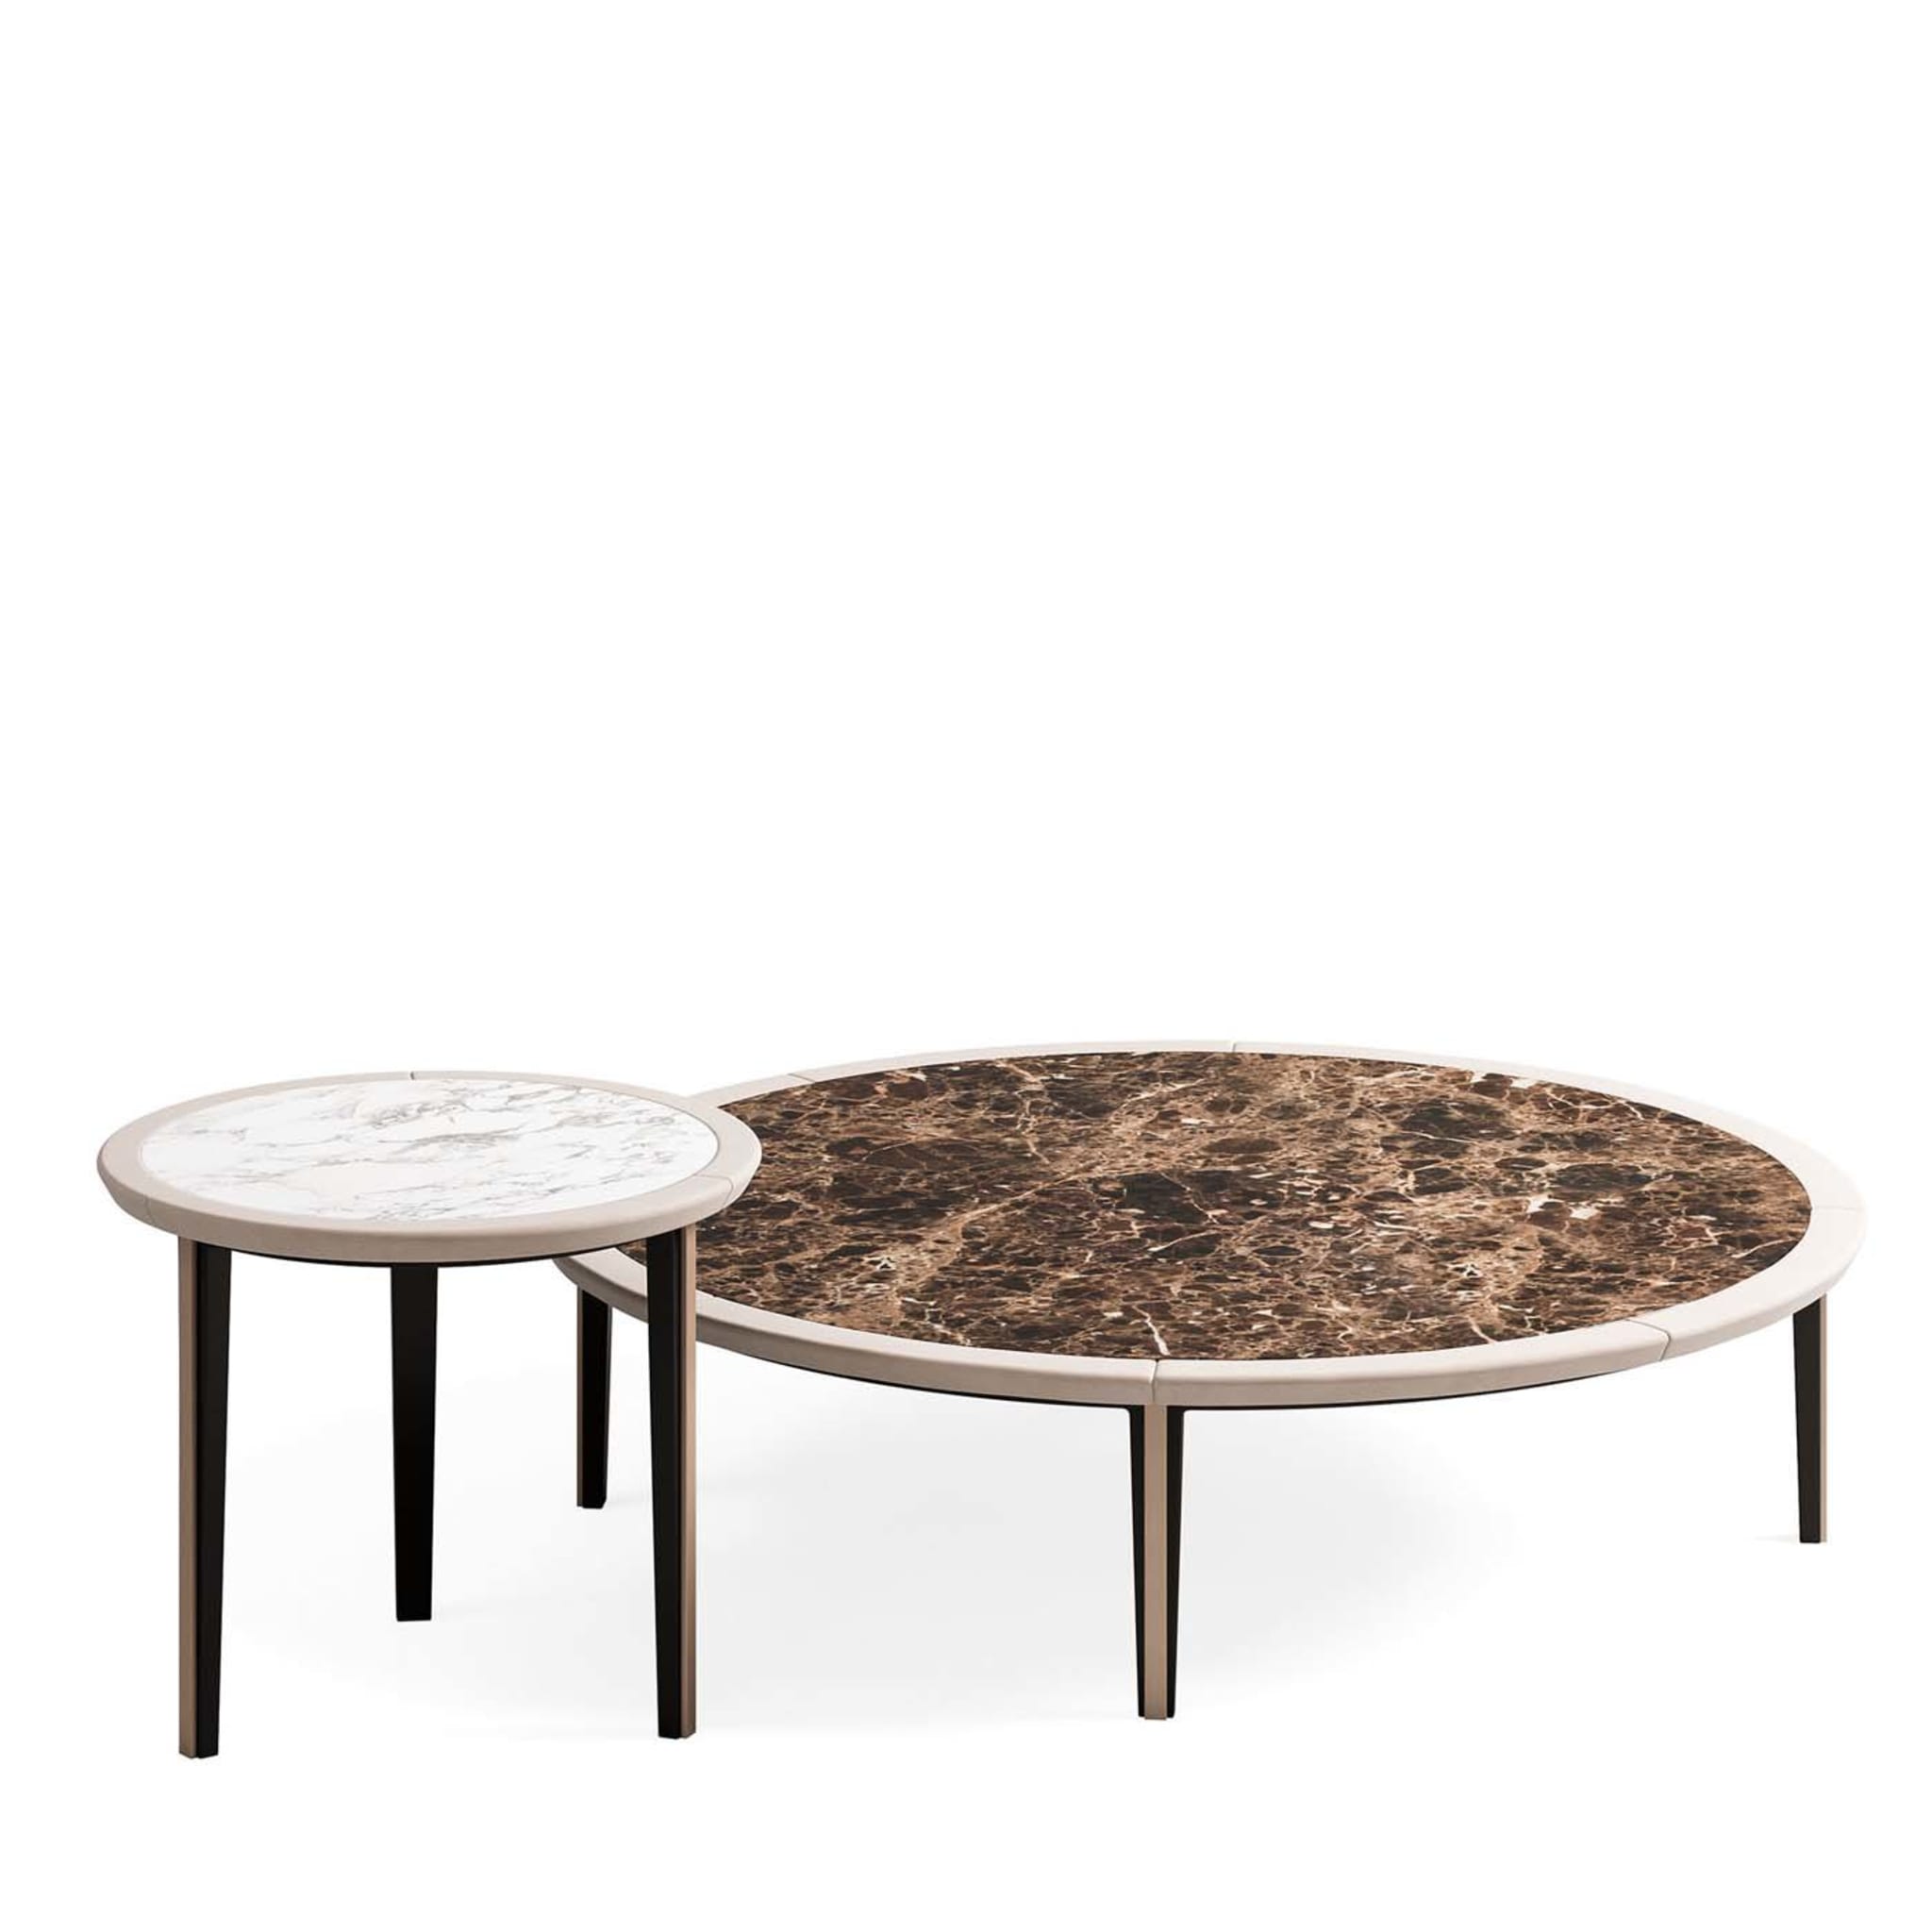 Set of Elan Side Table and Circle Coffee Table - Main view